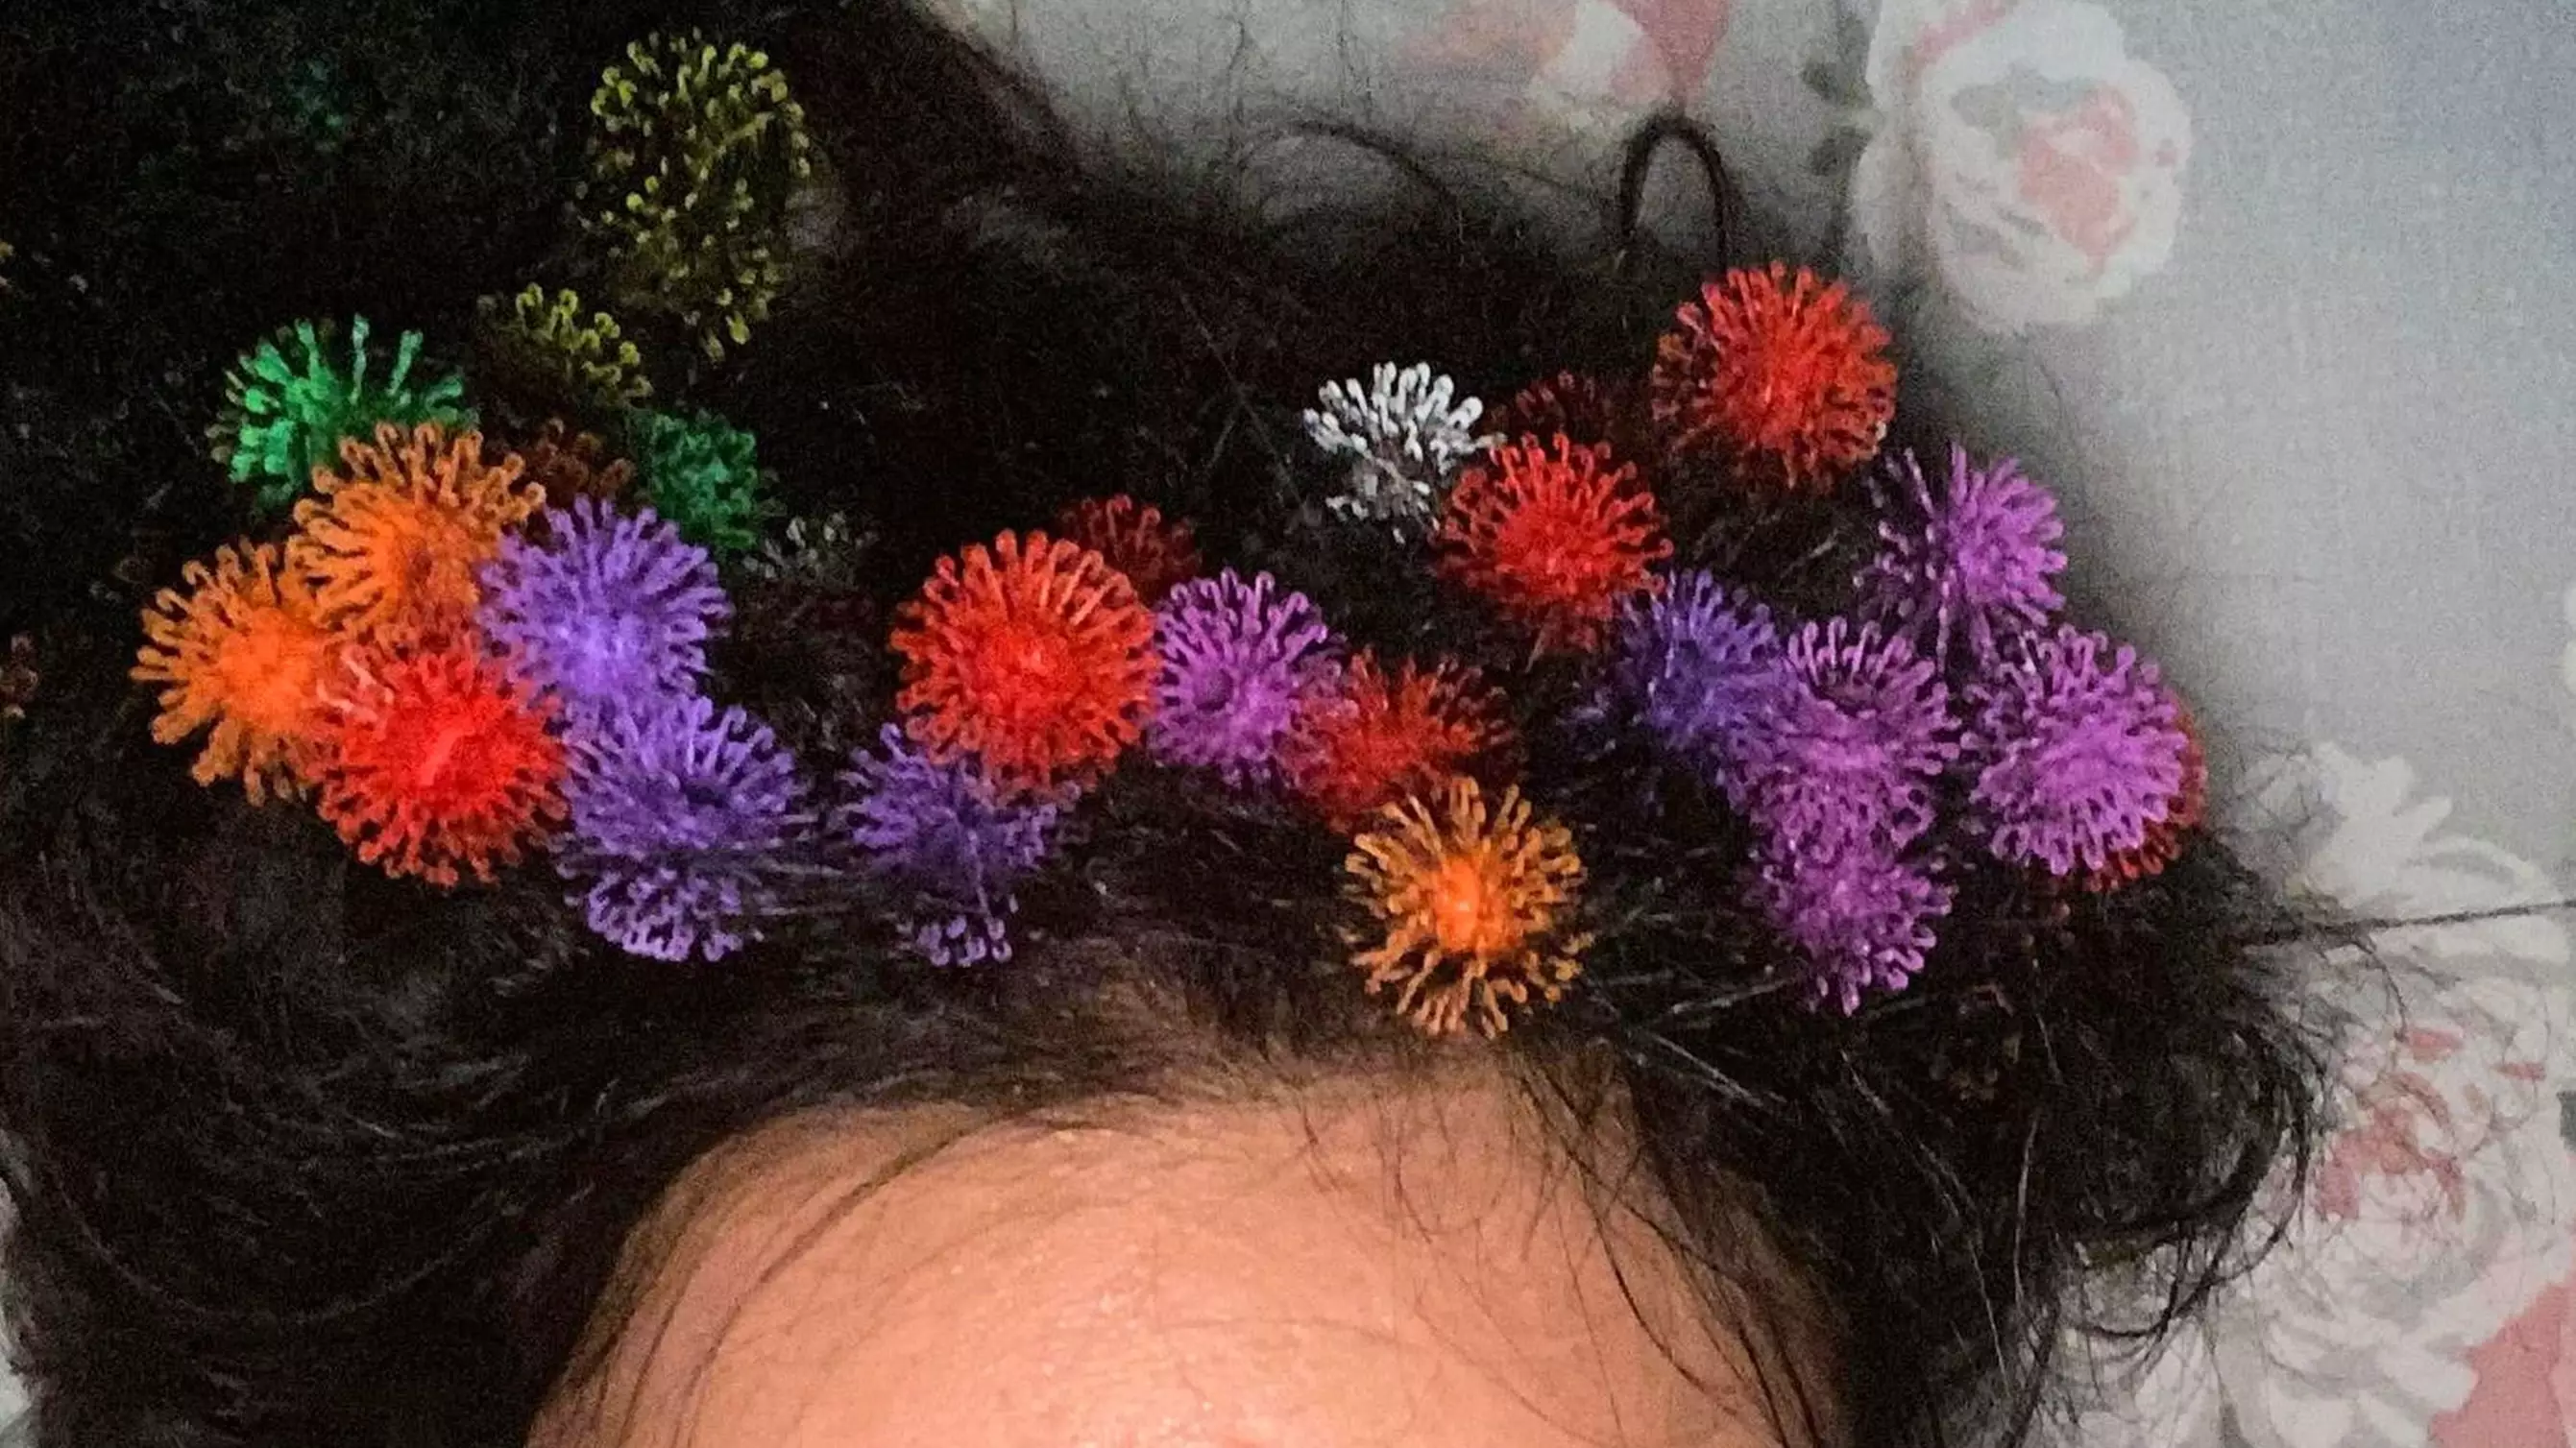 Mum Feared She Would Have To Cut Her Hair After Kids Get Bunchem Toys Entangled